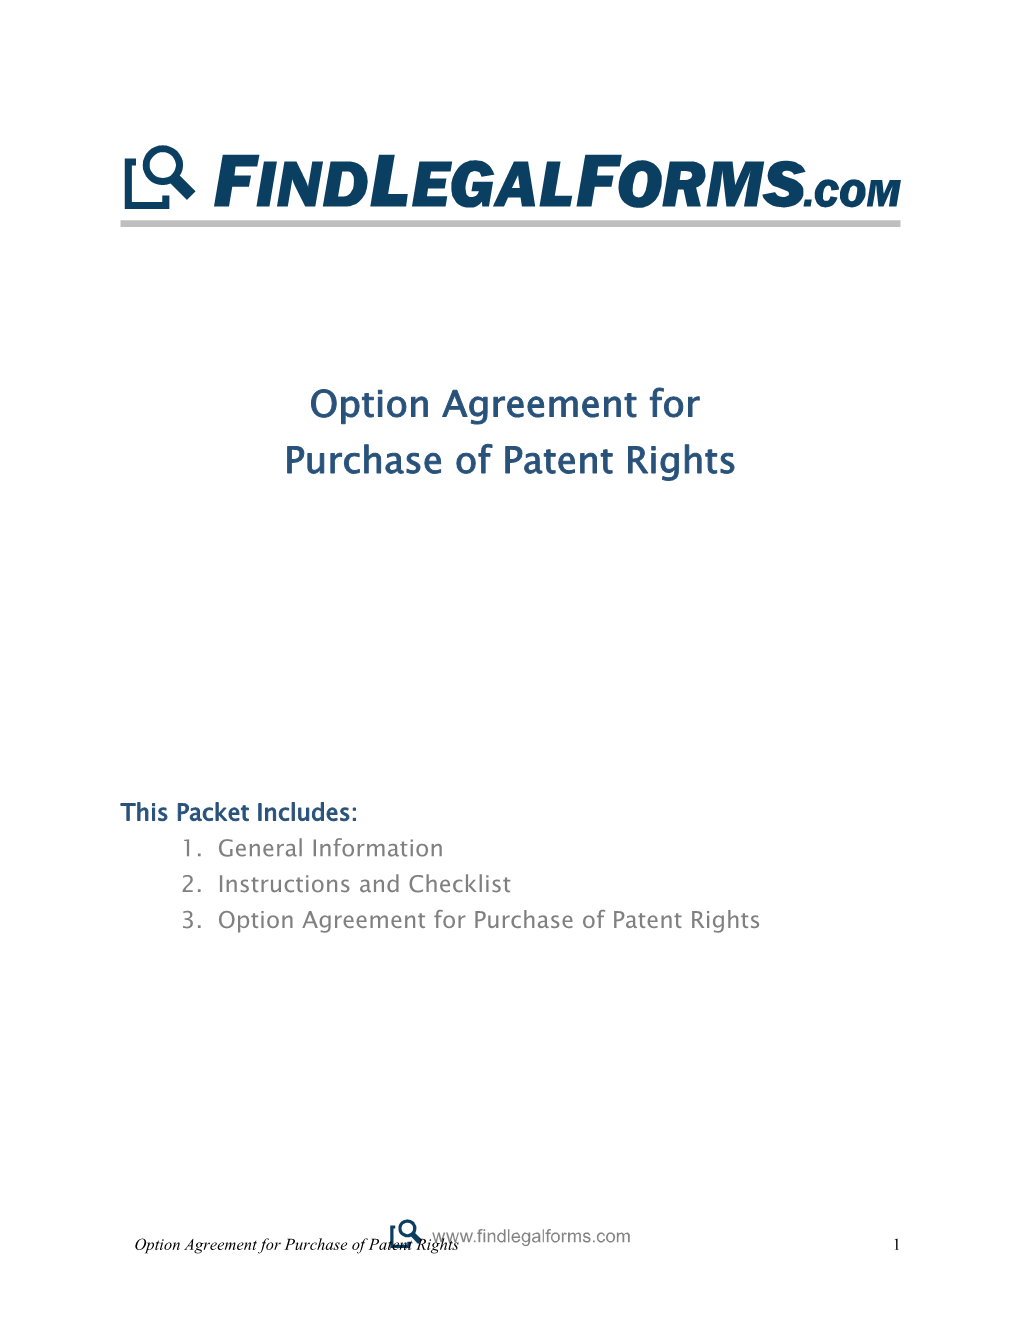 Option Agreement for Purchase of Patent Rights